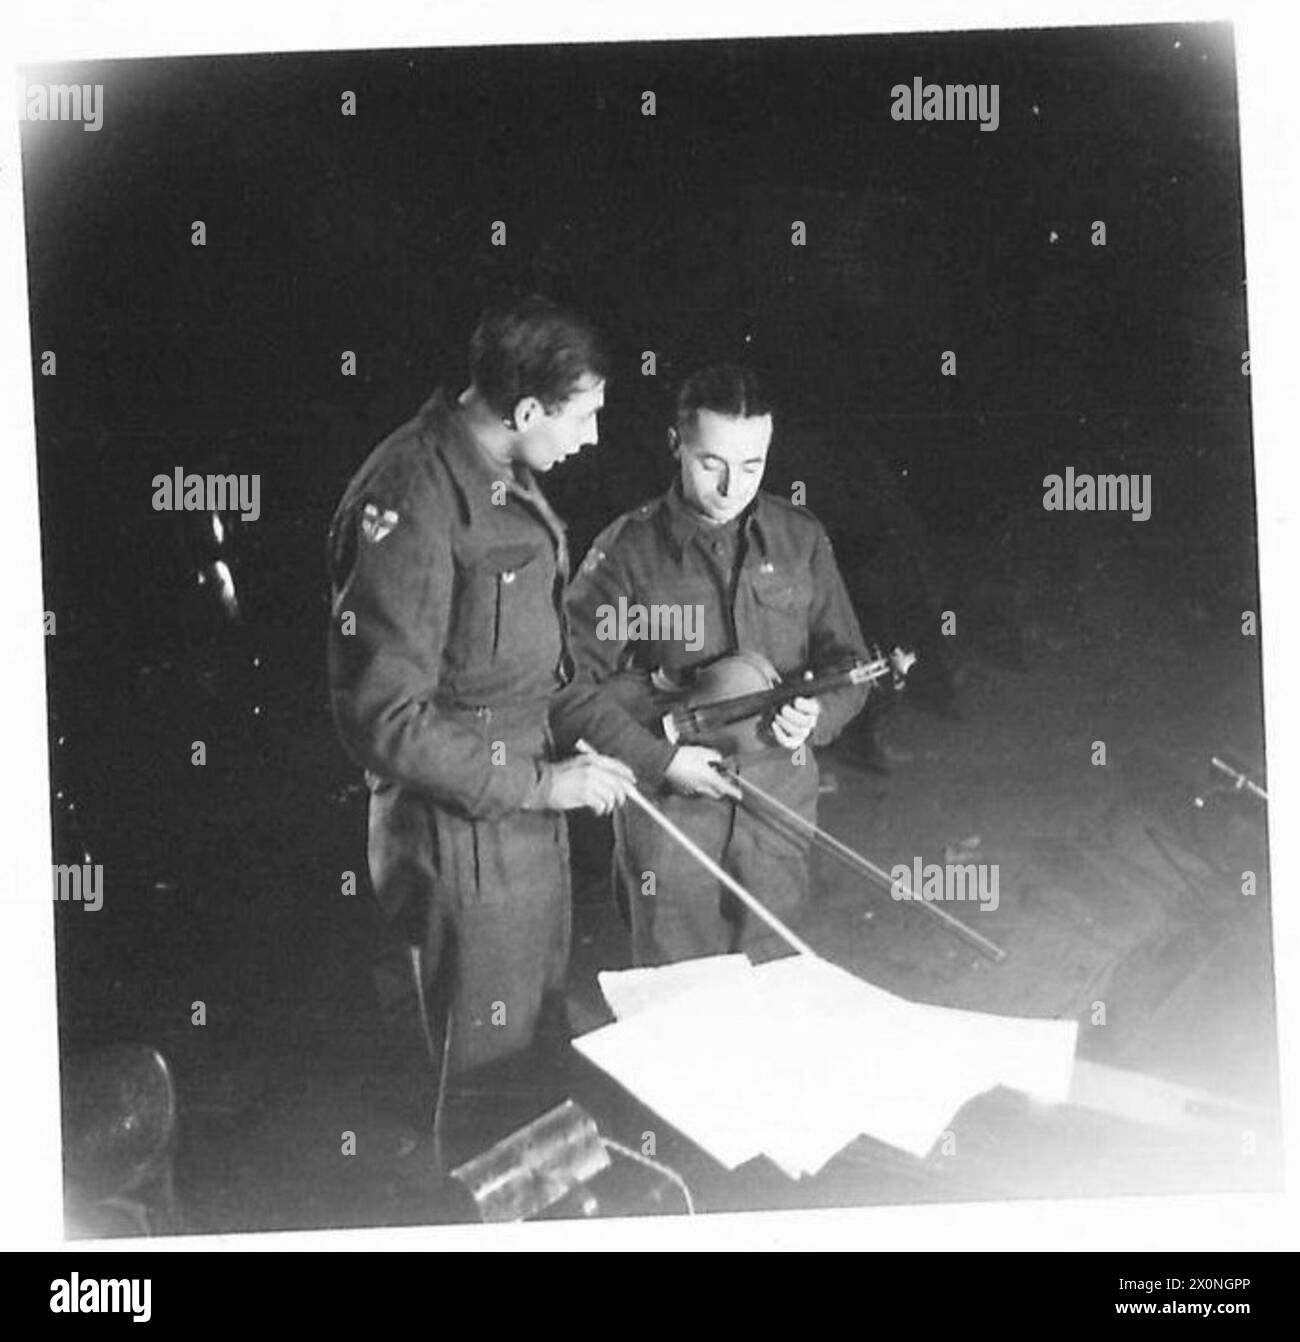 EIGHTH ARMY - The conductor of the orchestra goes over the score with the leader of the violins. Conductor - Dennis Sabin, 99 Salcott Road, Battersea, S.W.11. The Leader - Patrick McGrory 81, Hirstwood Road, Saltaire, Shipley, Yorks. Photographic negative , British Army Stock Photo